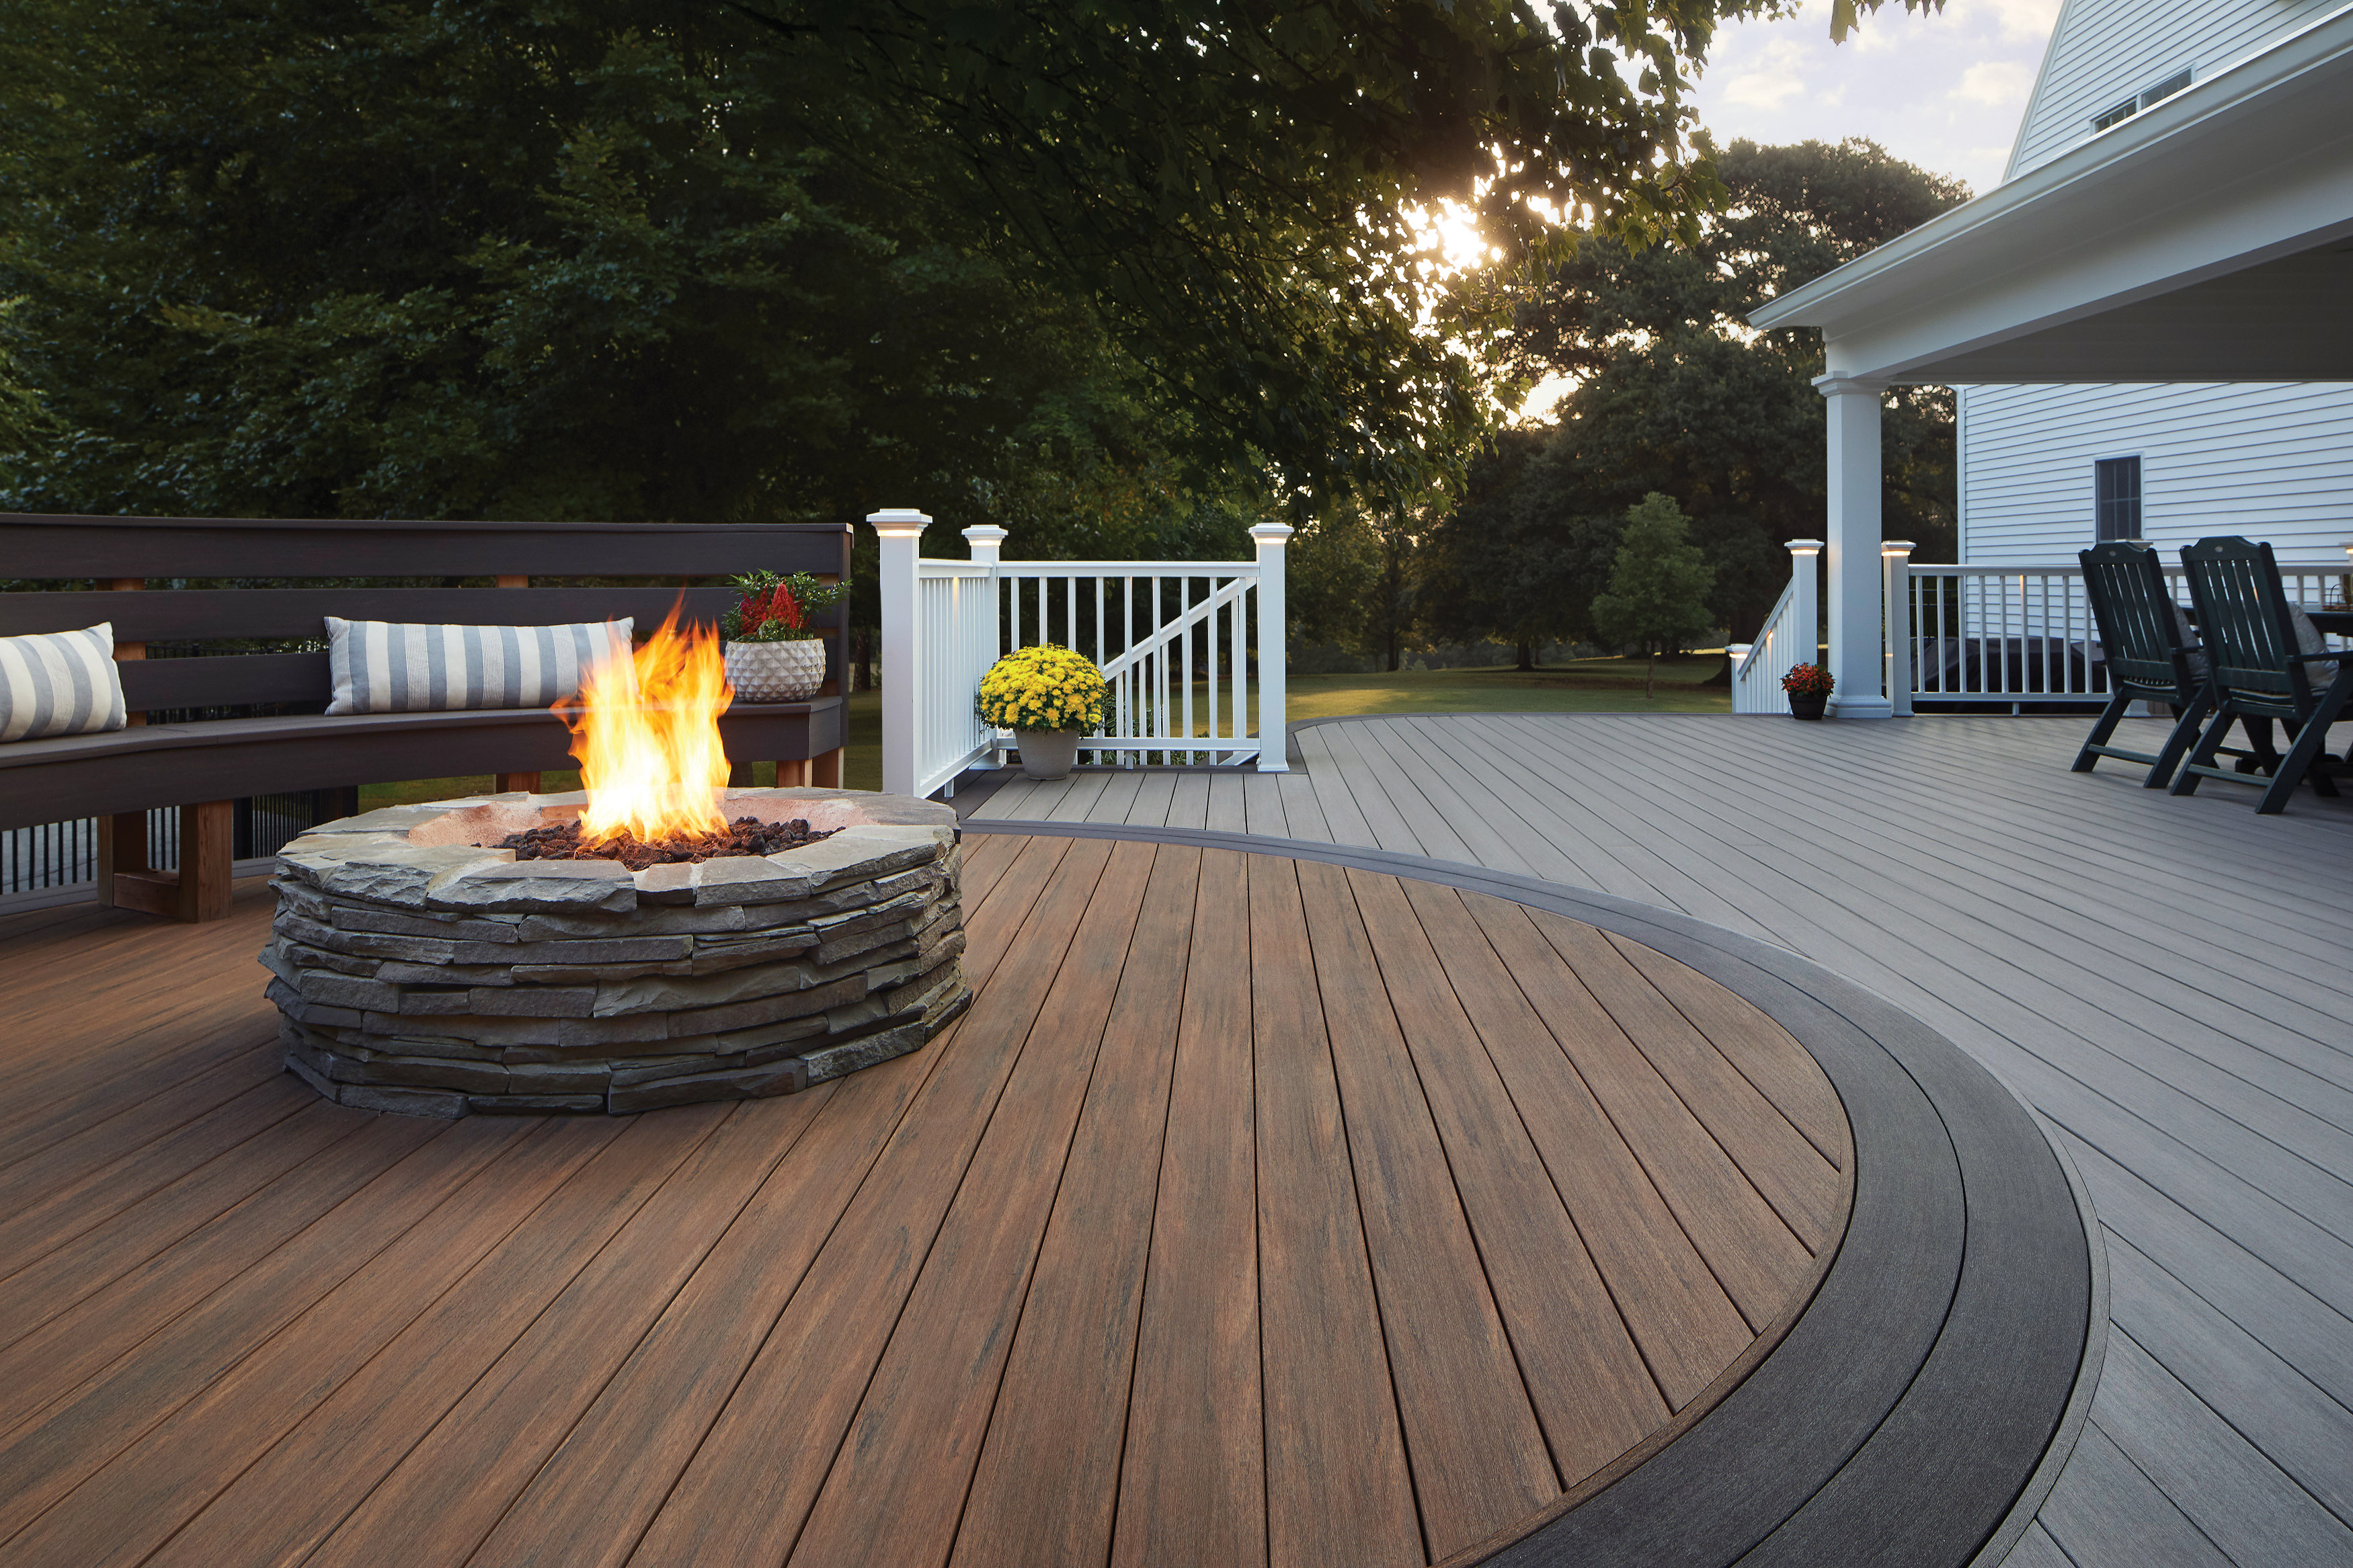 Weyerhaeuser AZEC Building materials used to make a stunning deck.